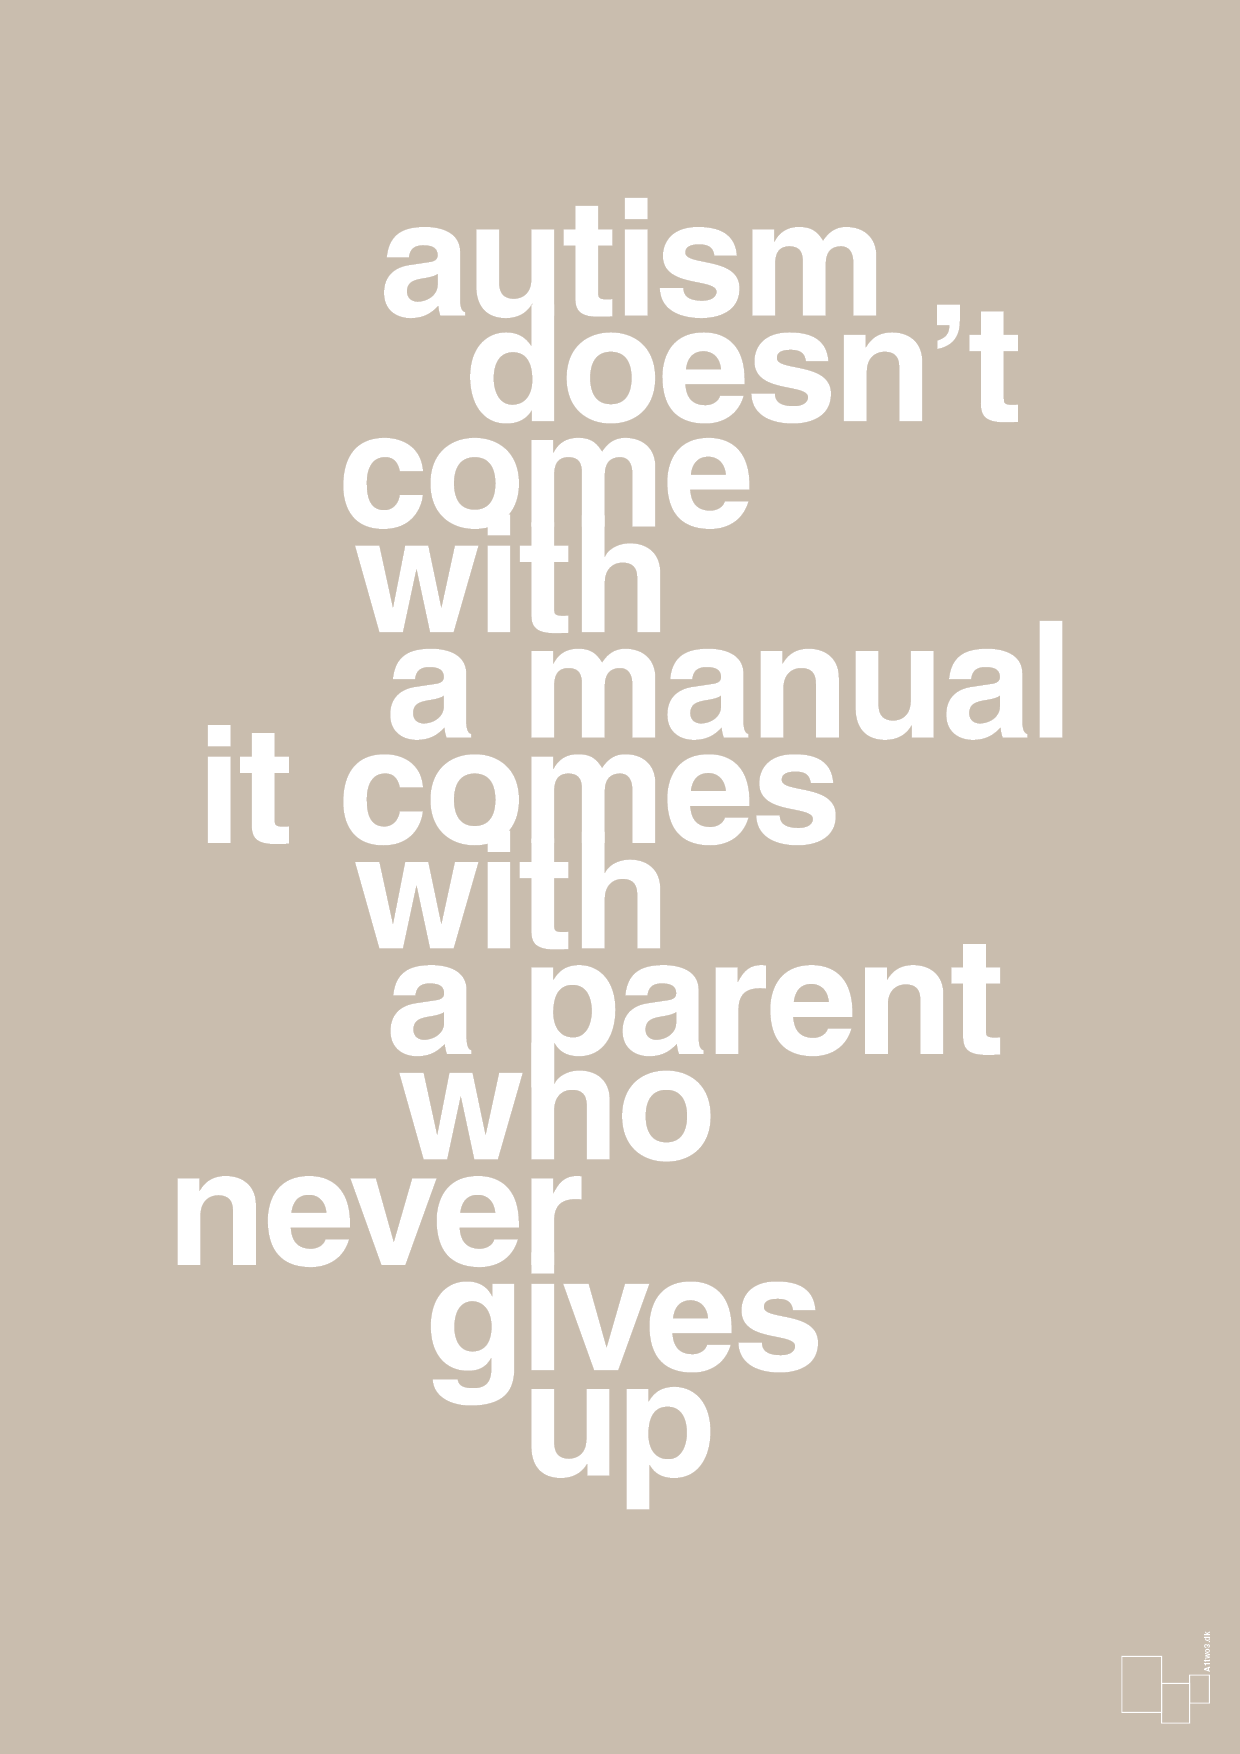 autism doesnt come with a manual it comes with a parent who never gives up - Plakat med Samfund i Creamy Mushroom